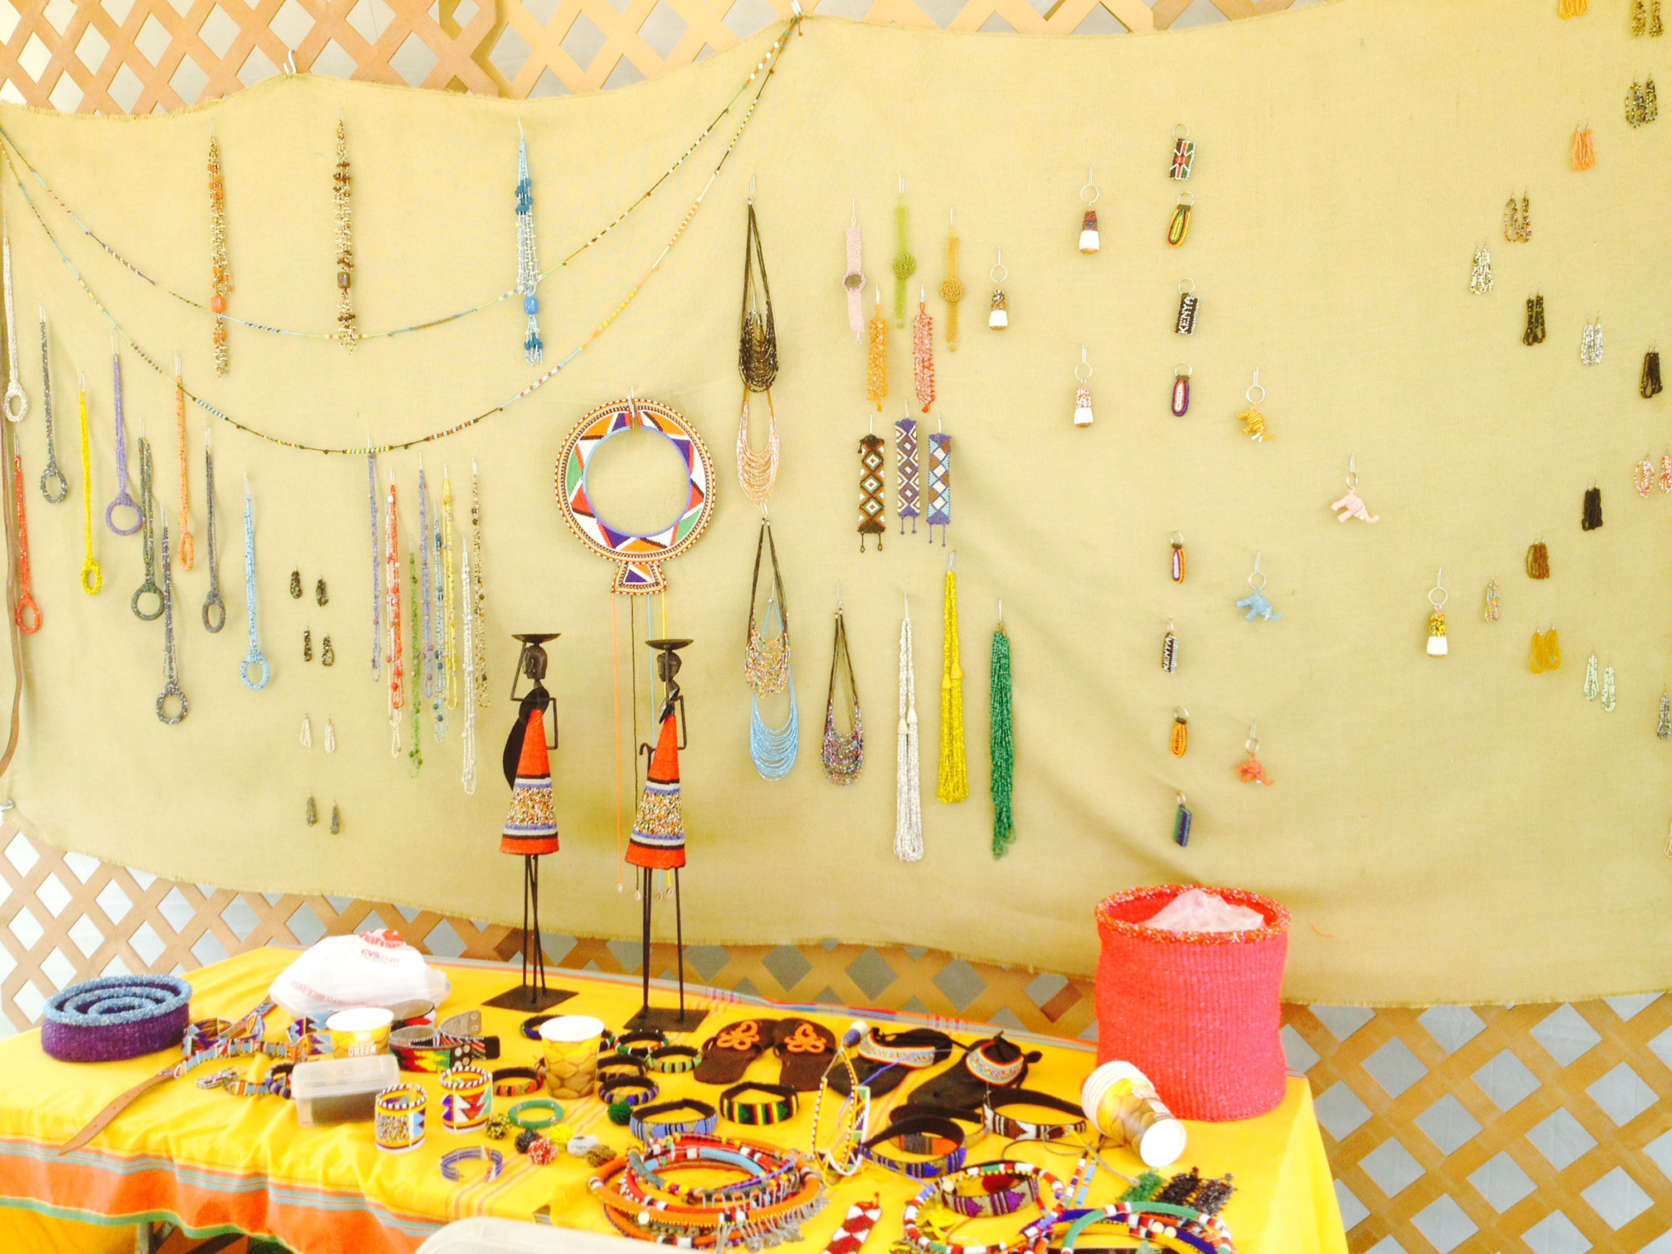 This photo taken July 2, 2014 shows beds and jewelry displayed at the Kenya bead and jewelry making tent at the Smithsonian Folklife Festival on the National Mall in Washington. The Kenya: Mambo Poa exhibit brought the traditions of the East African country together in a cultural celebration. Beads have been integral to Africans for thousands of years. According to the Smithsonian Center for Education and Museum Studies website, the earliest examples of manufactured beads were found in in Libya and Sudan and date to 10,000 B.C. Bead work remains part of the cultural tradition in several African tribes, including Irungus Kikuyu, Chemakwanys Pokot and Caroline Sengenys Maasai. (AP Photo/Emmilyne Victor)